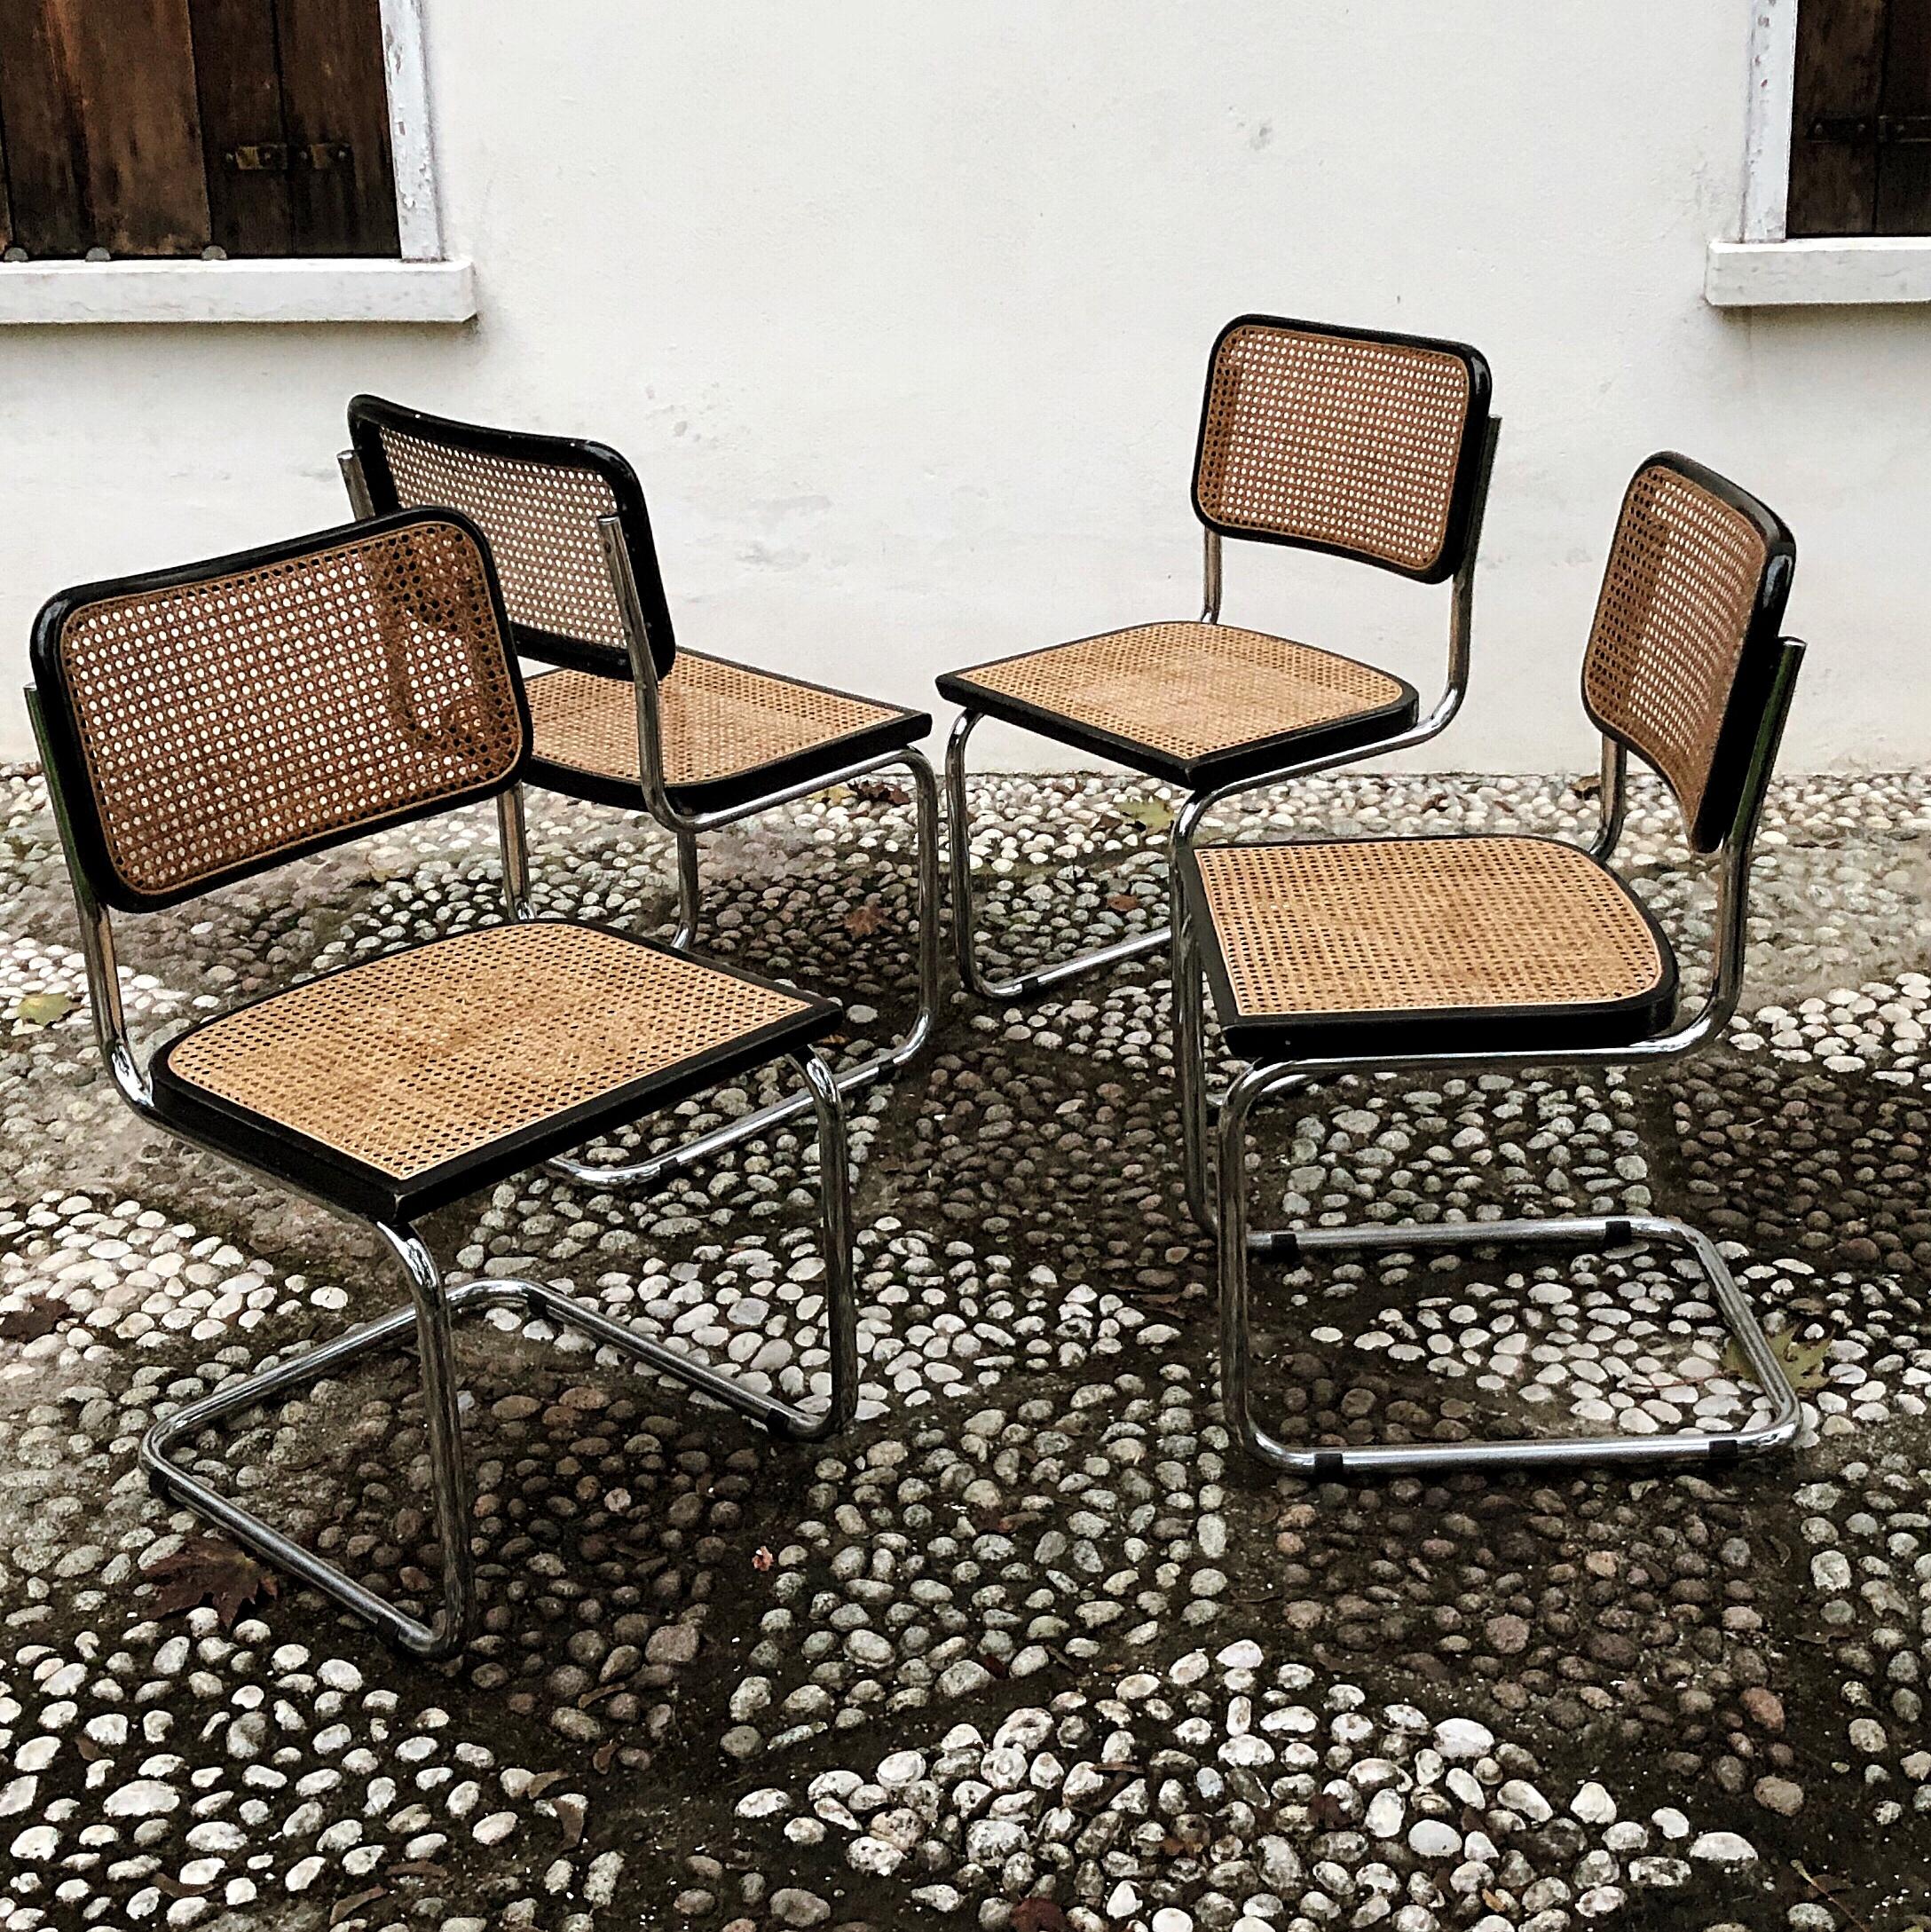 Beautiful set of 4 original B32 “Cesca” dining chairs. Cesca chairs were originally designed in 1928 by French Hungarian architect Marcel Breuer and named after his daughter Francesca.

 Modernist, architect and furniture designer, Marcel Breuer,